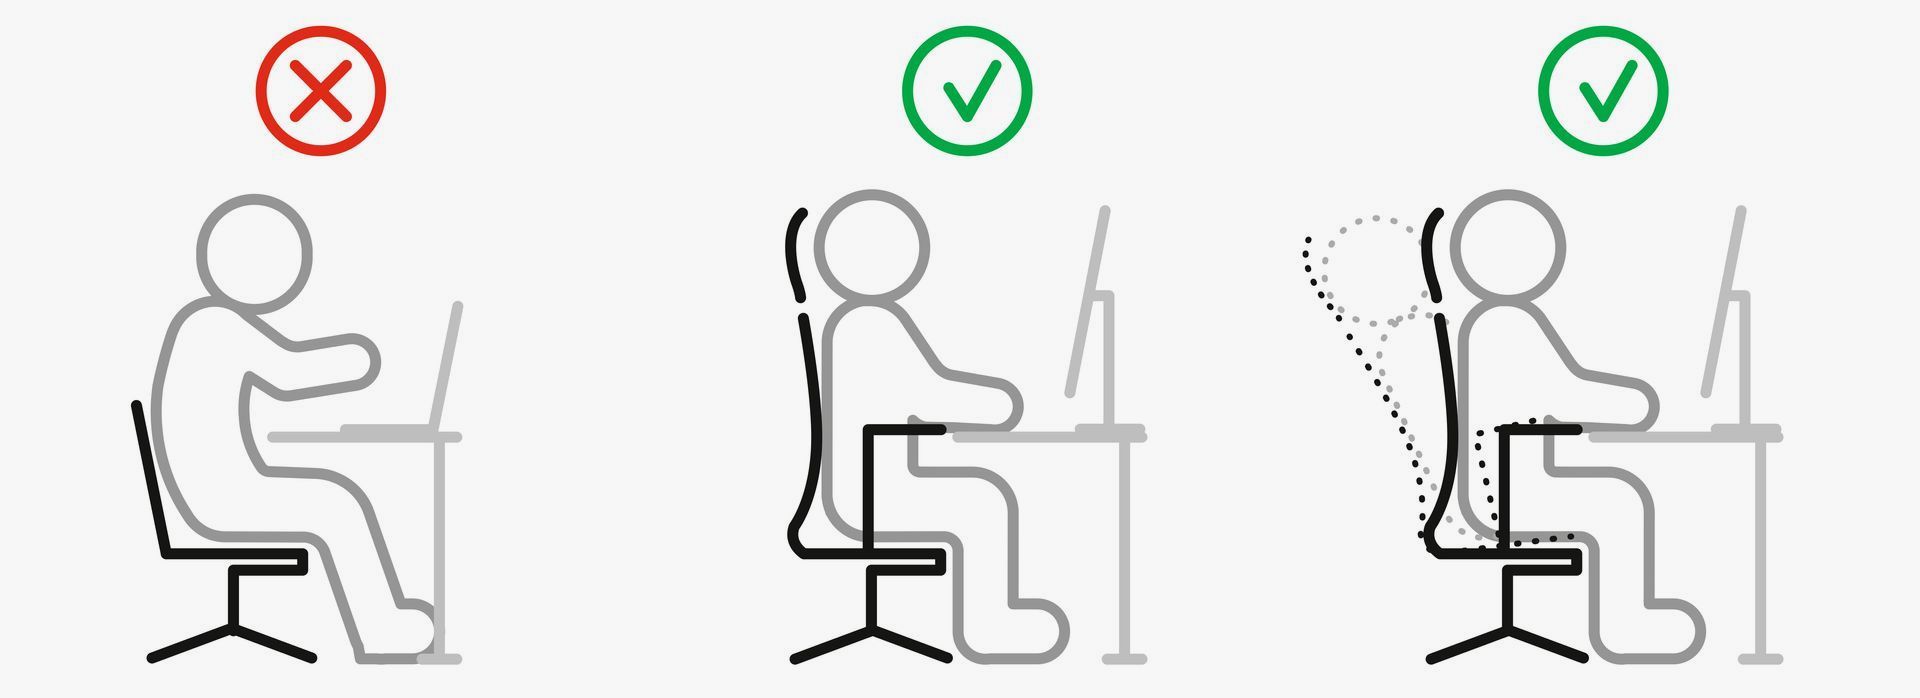 Healthy seated posture diagram. The first image shows a person sitting slouched at a desk with a laptop and a non-ergonomic chair. There is a red x above the image to highlight this is an incorrect sitting position. The next image is a person sitting in an ergonomic chair, their eyes level with their pc monitor. There is a green check above the diagram. The third image shows a person in an ergonomic seat, reclining back and forward. There is a green check above the image. 